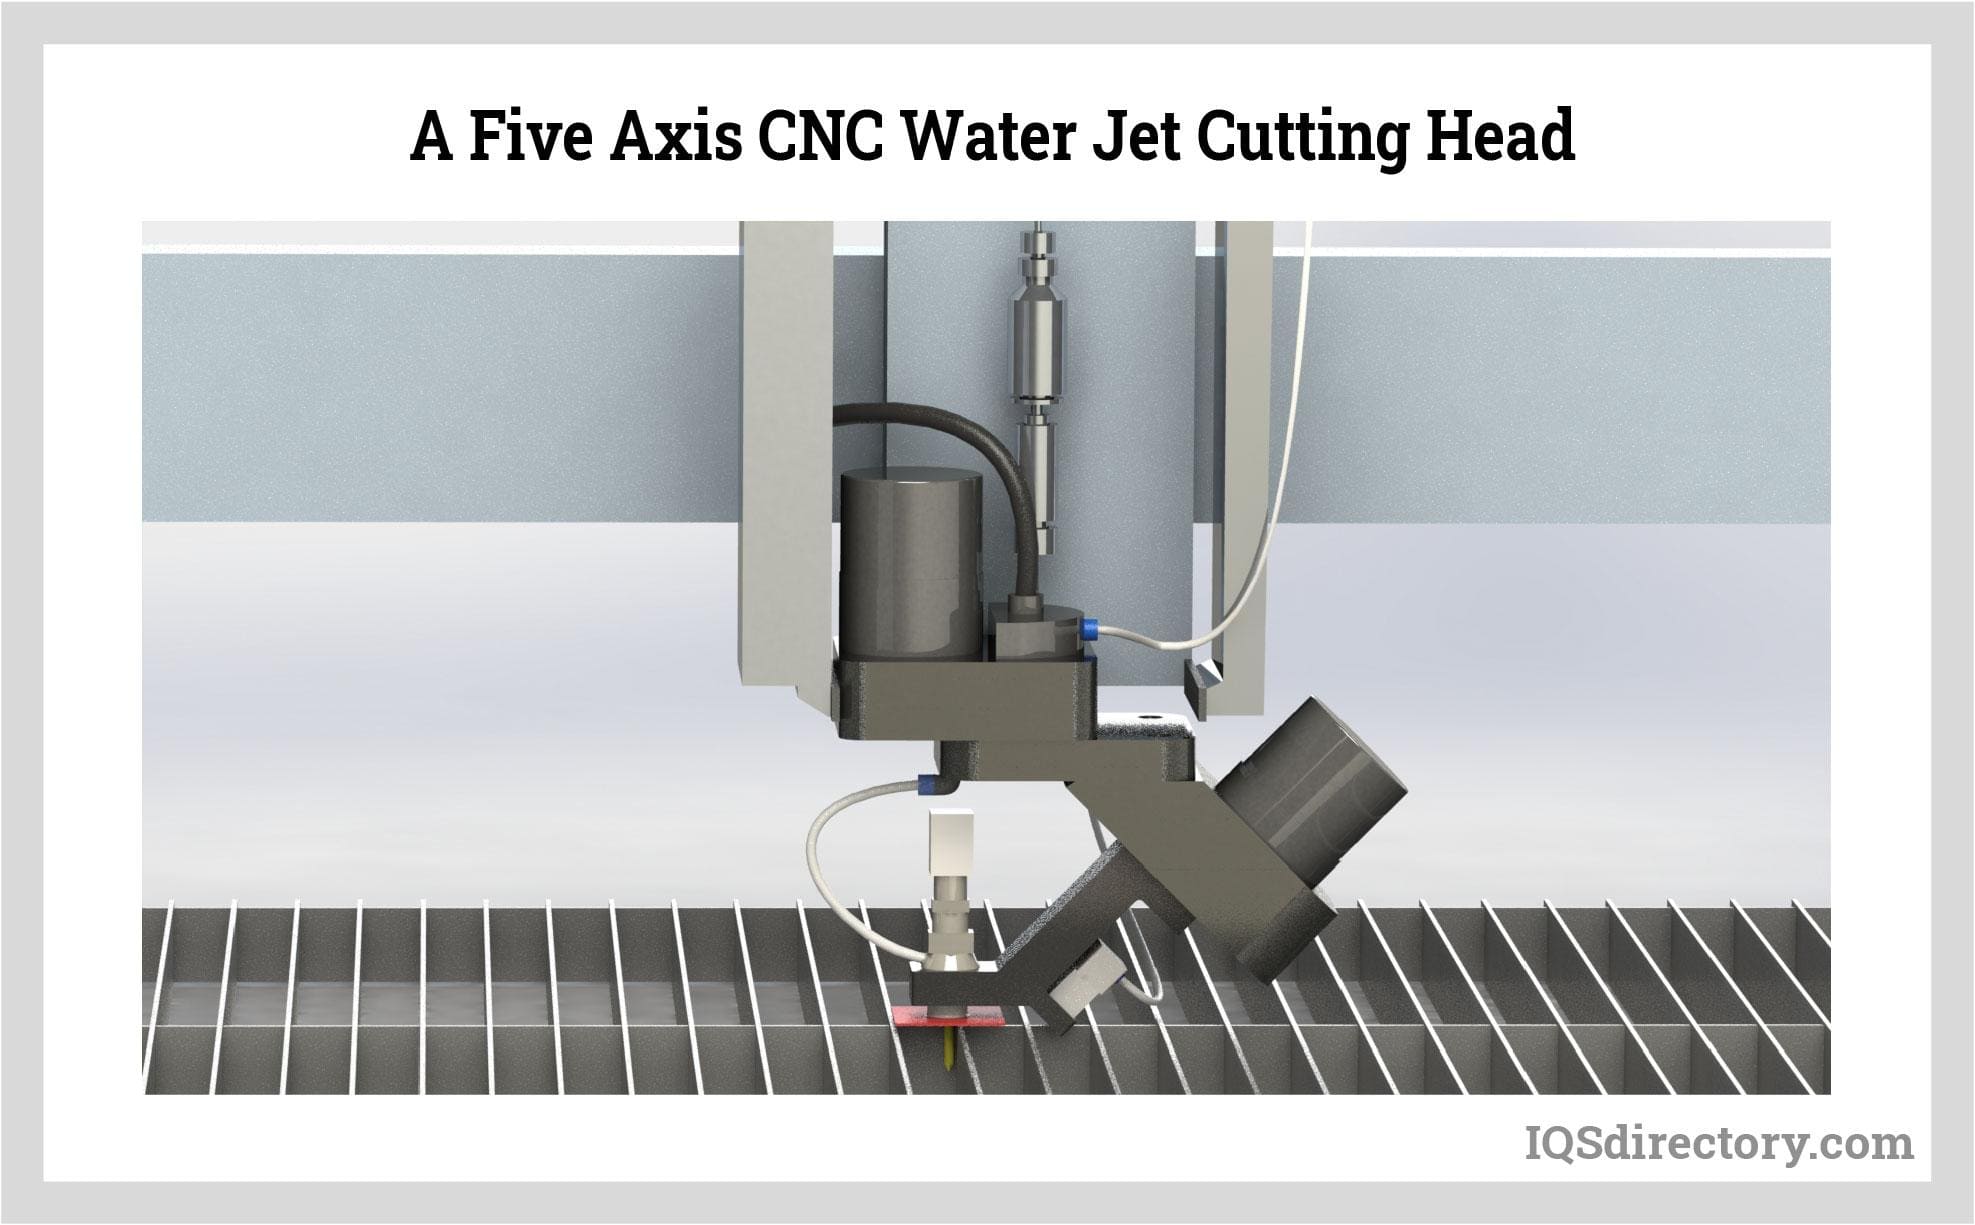 A Five Axis CNC Water Jet Cutting Head